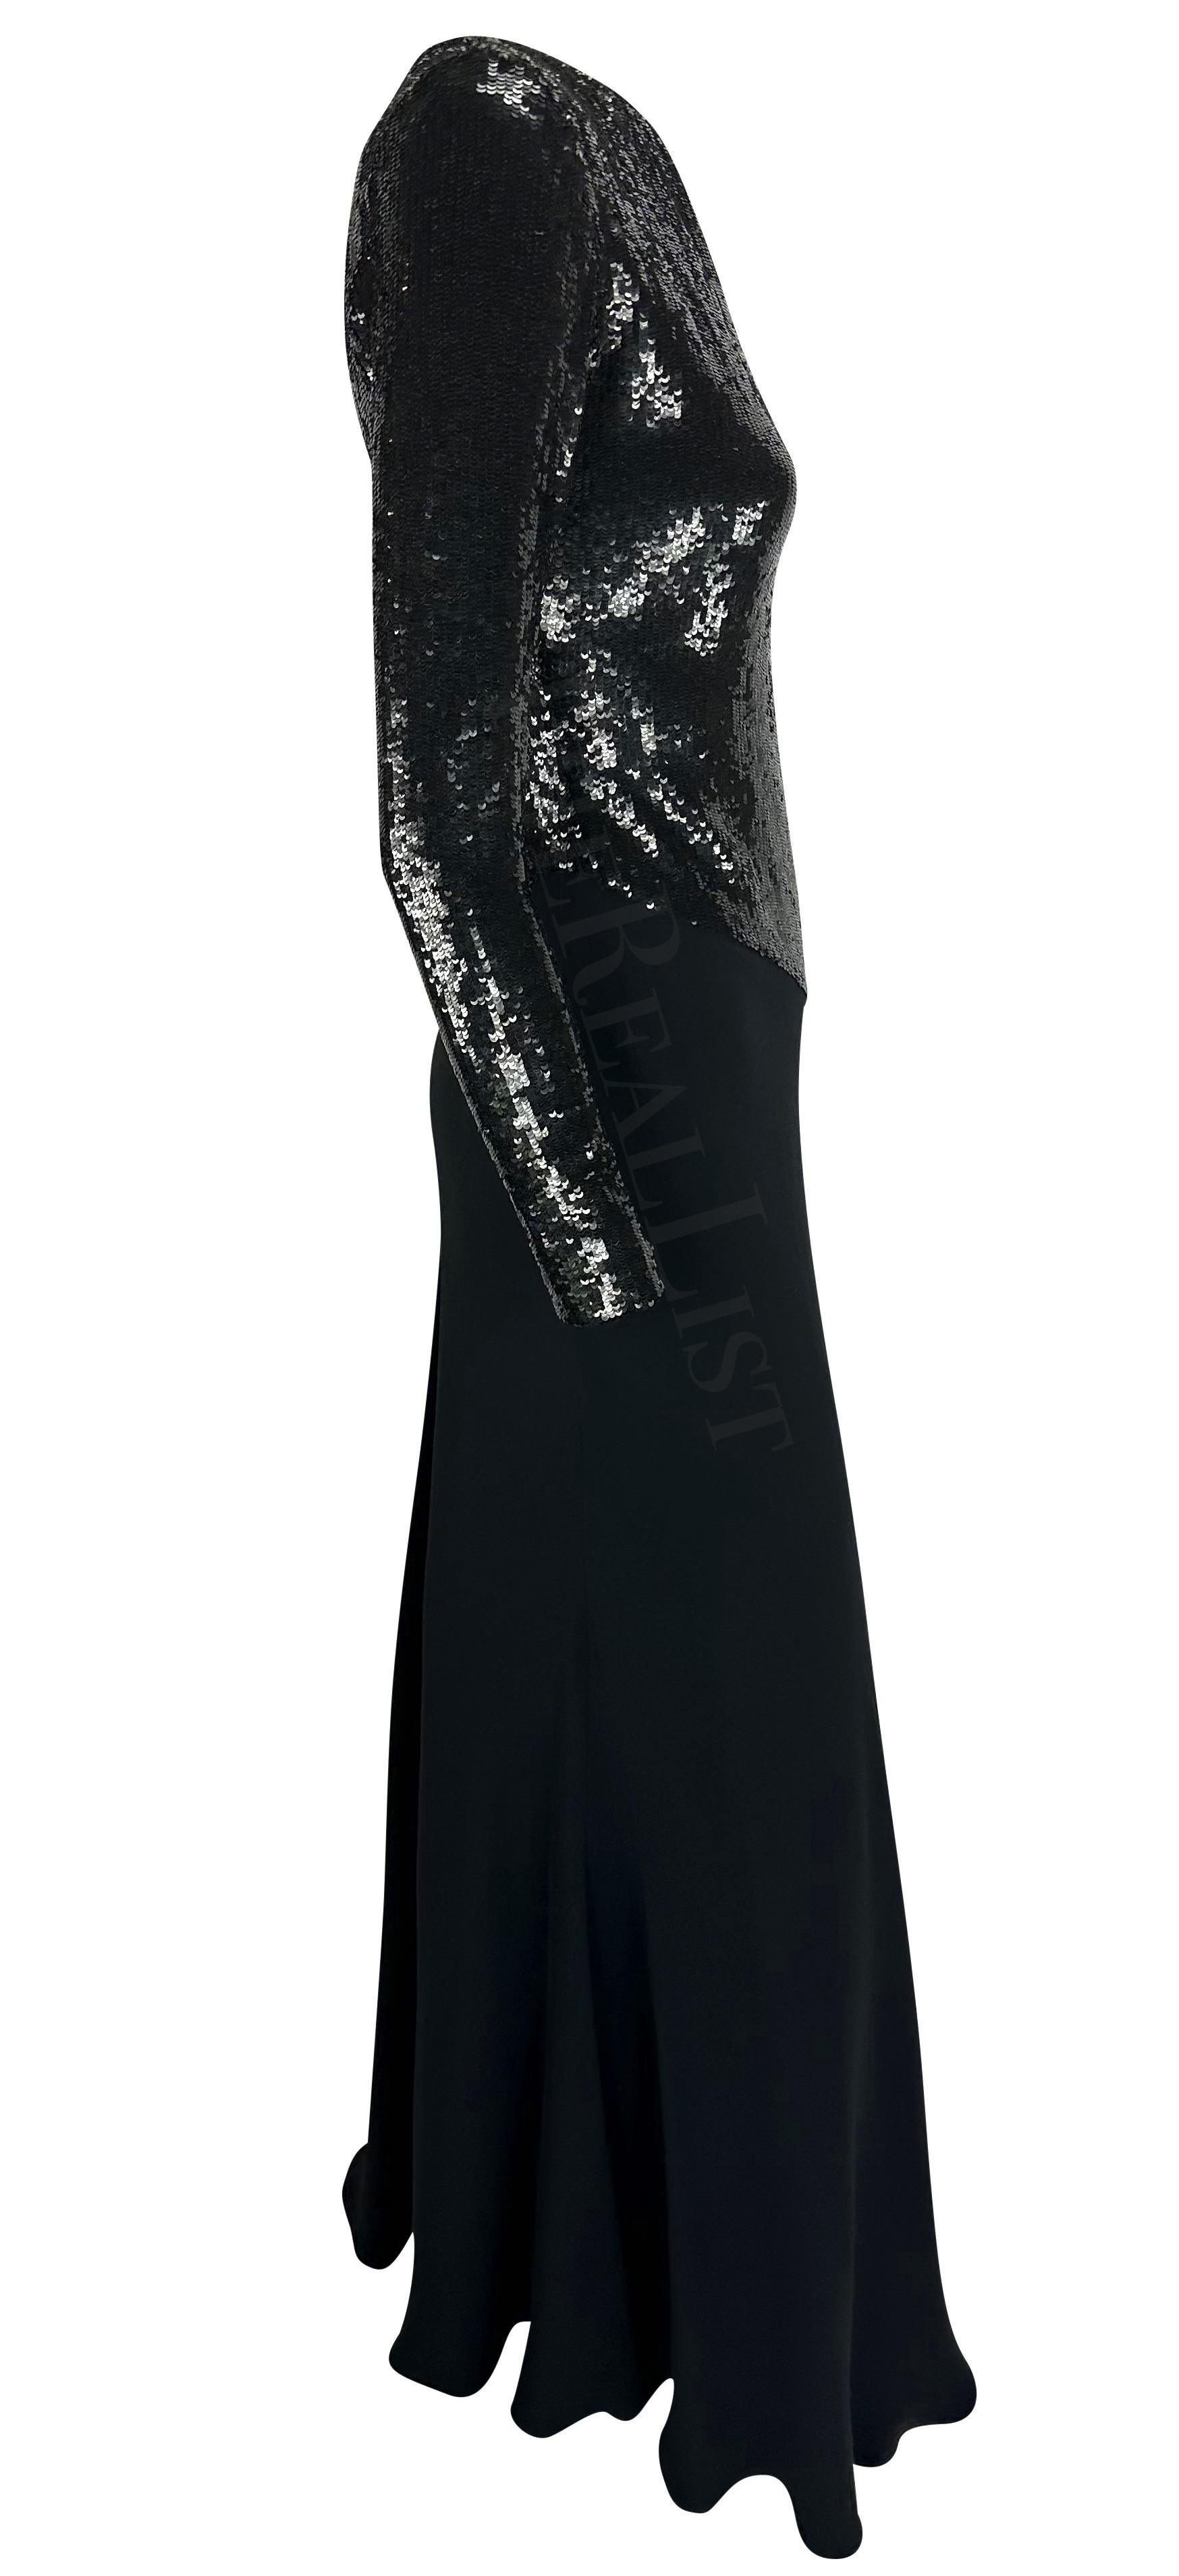 F/W 1995 Ralph Lauren Runway Stretch Sequin Asymmetric Black Flare Evening Gown In Excellent Condition For Sale In West Hollywood, CA